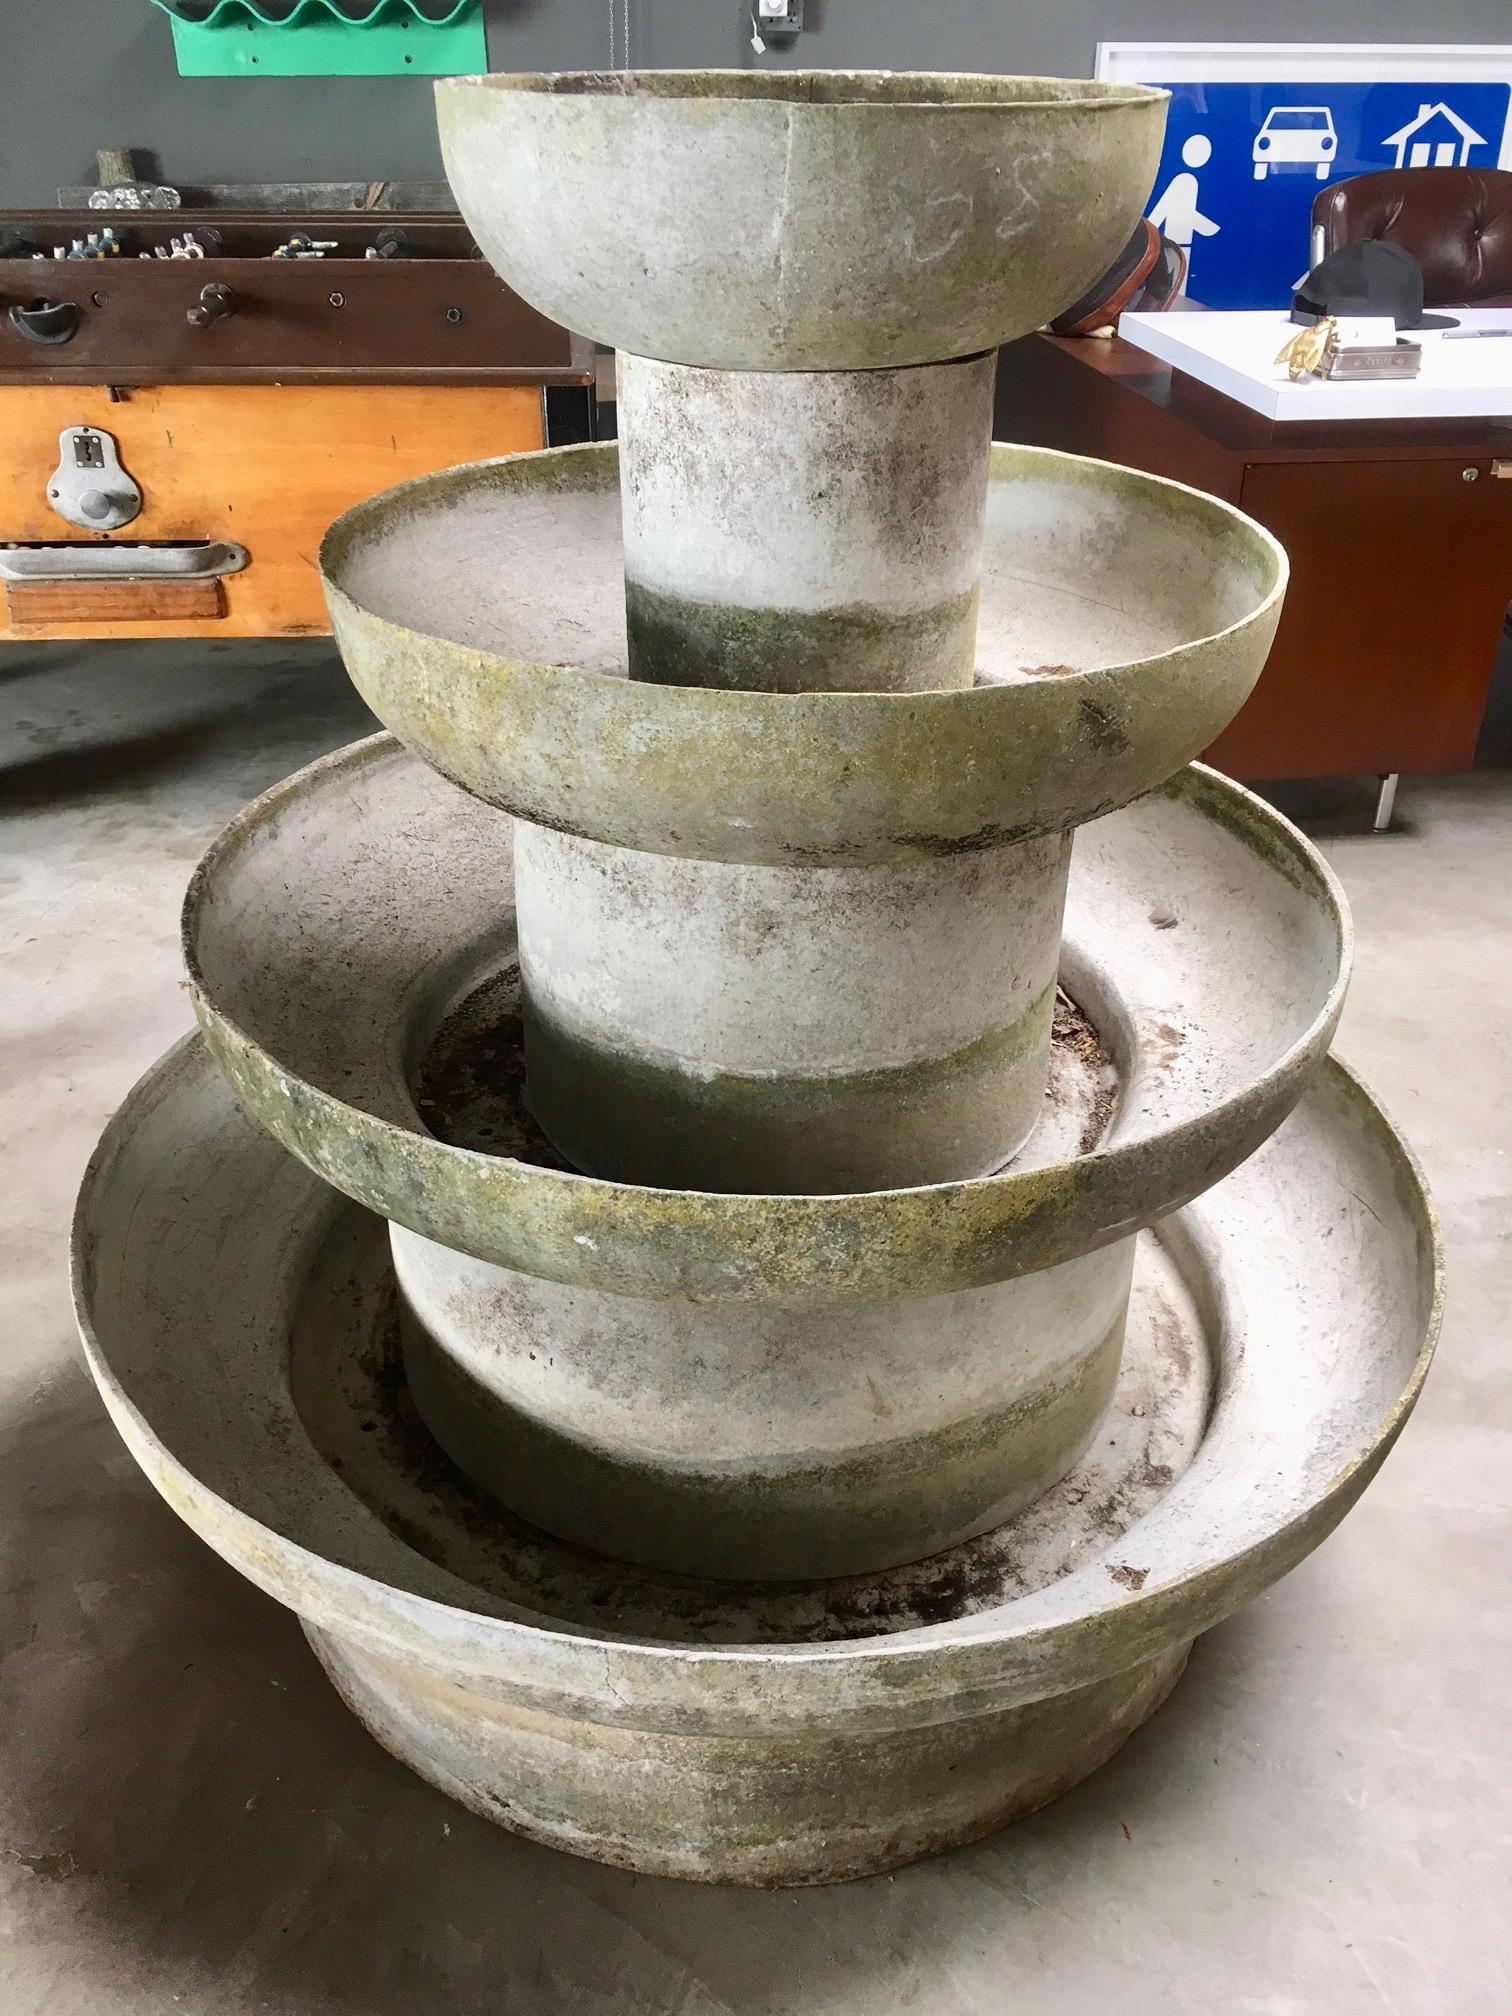 Rare concrete fountain by Willy Guhl for Eternit. Fabricated out of cement. Only fountain known to exist. Great sculpture and object. Four tiers. Just under 4 feet tall. Four circular bases  with 4 rounded bowls atop each base. Bases are hollow.